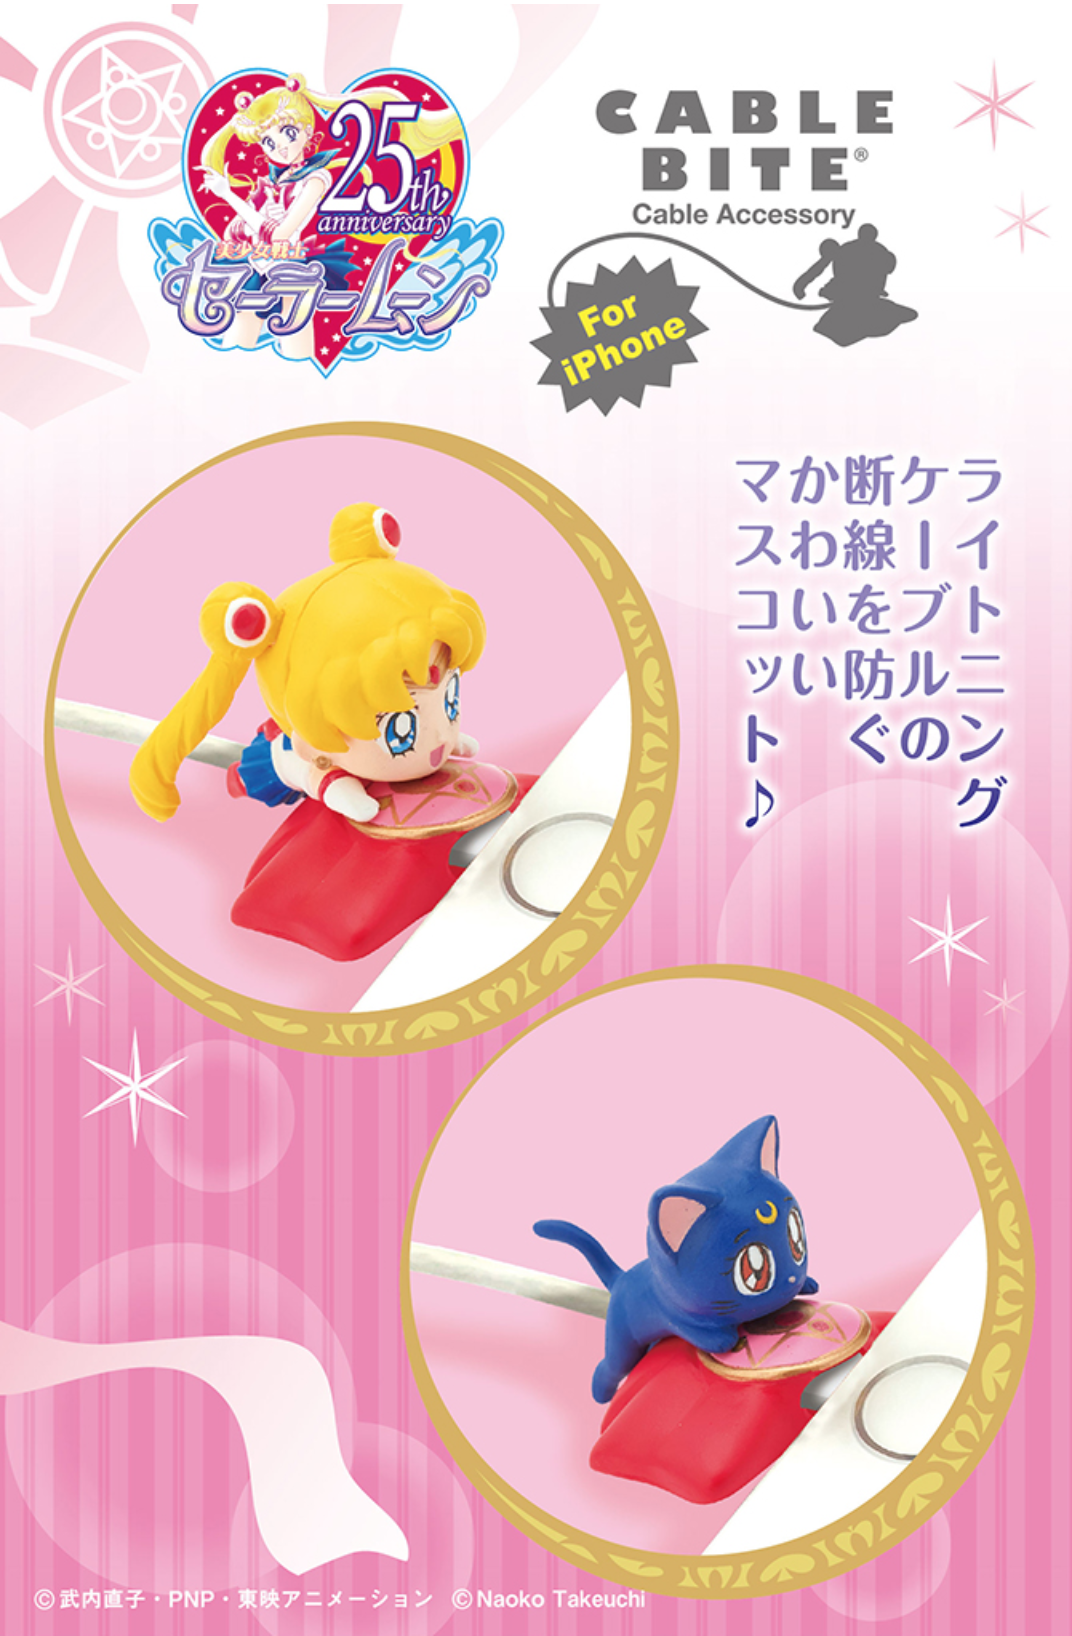 Sailor Moon x CABLE BITE Cable Accessory